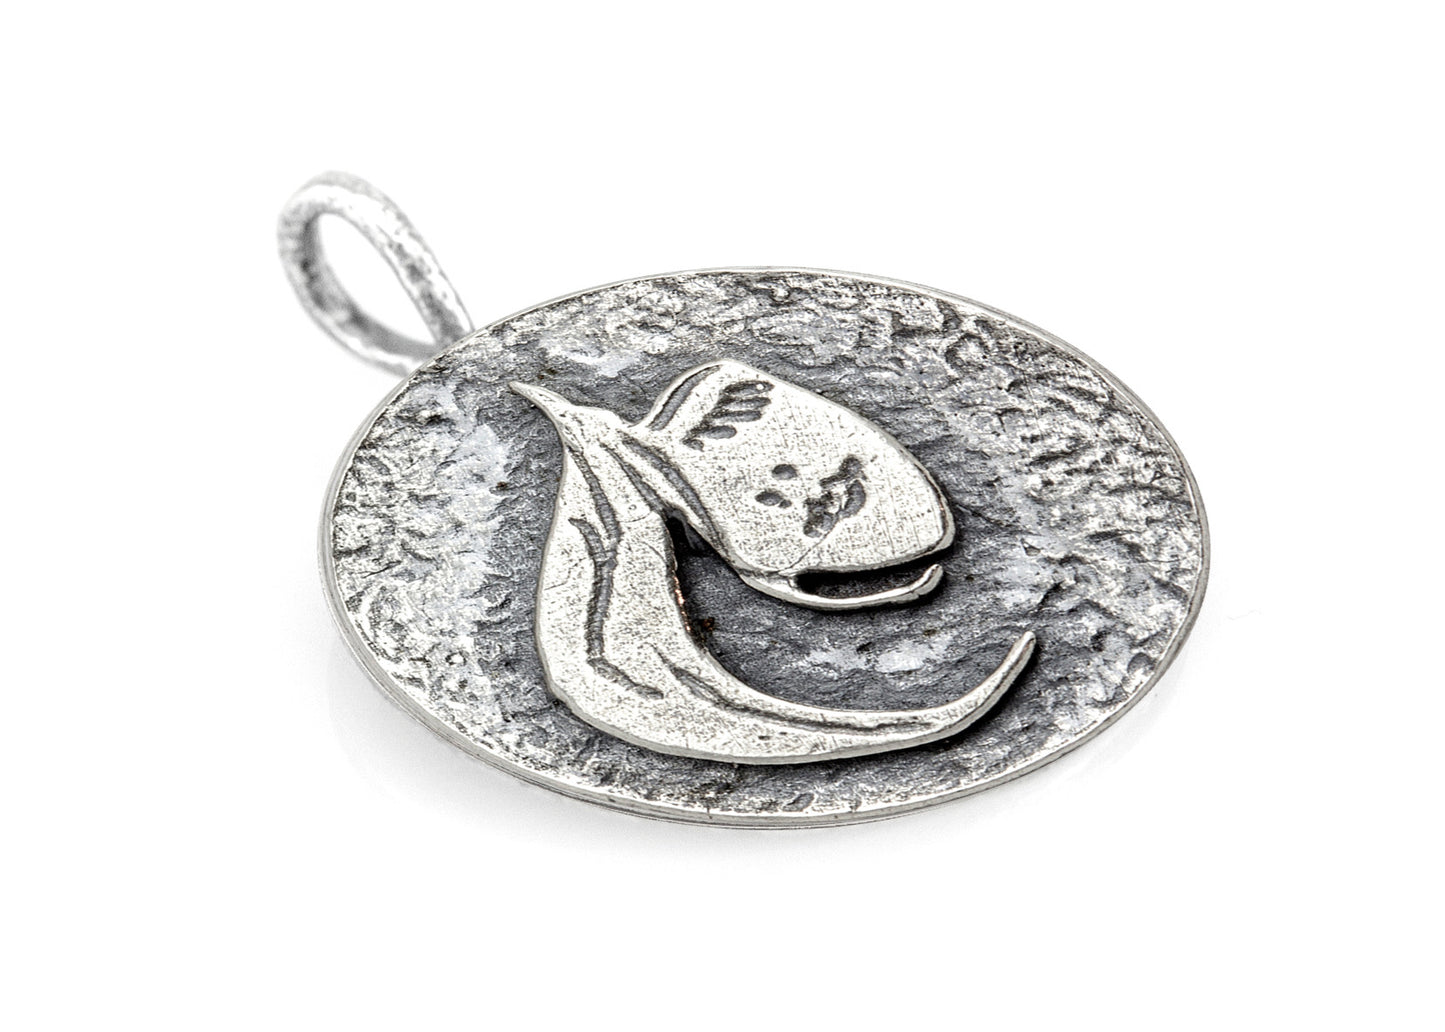 Stylish Face Medallion Coin Necklace